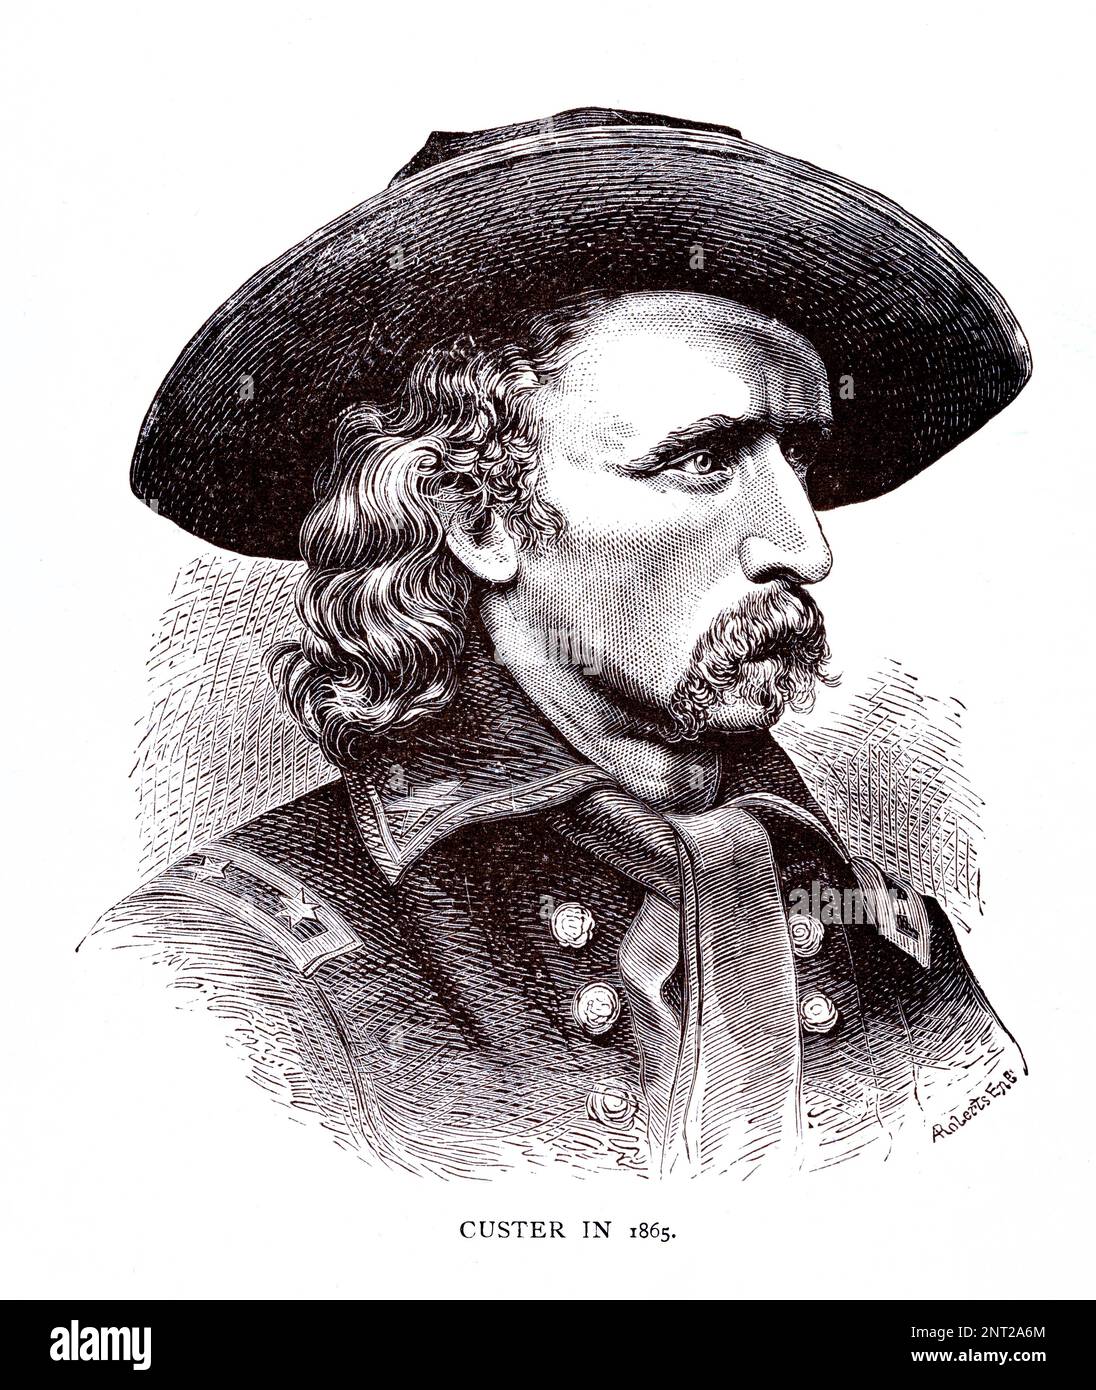 General George Armstrong Custer, 1839 – 1876, was a United States Army officer and cavalry commander in the American Civil War, vintage illustration from 1865 Stock Photo